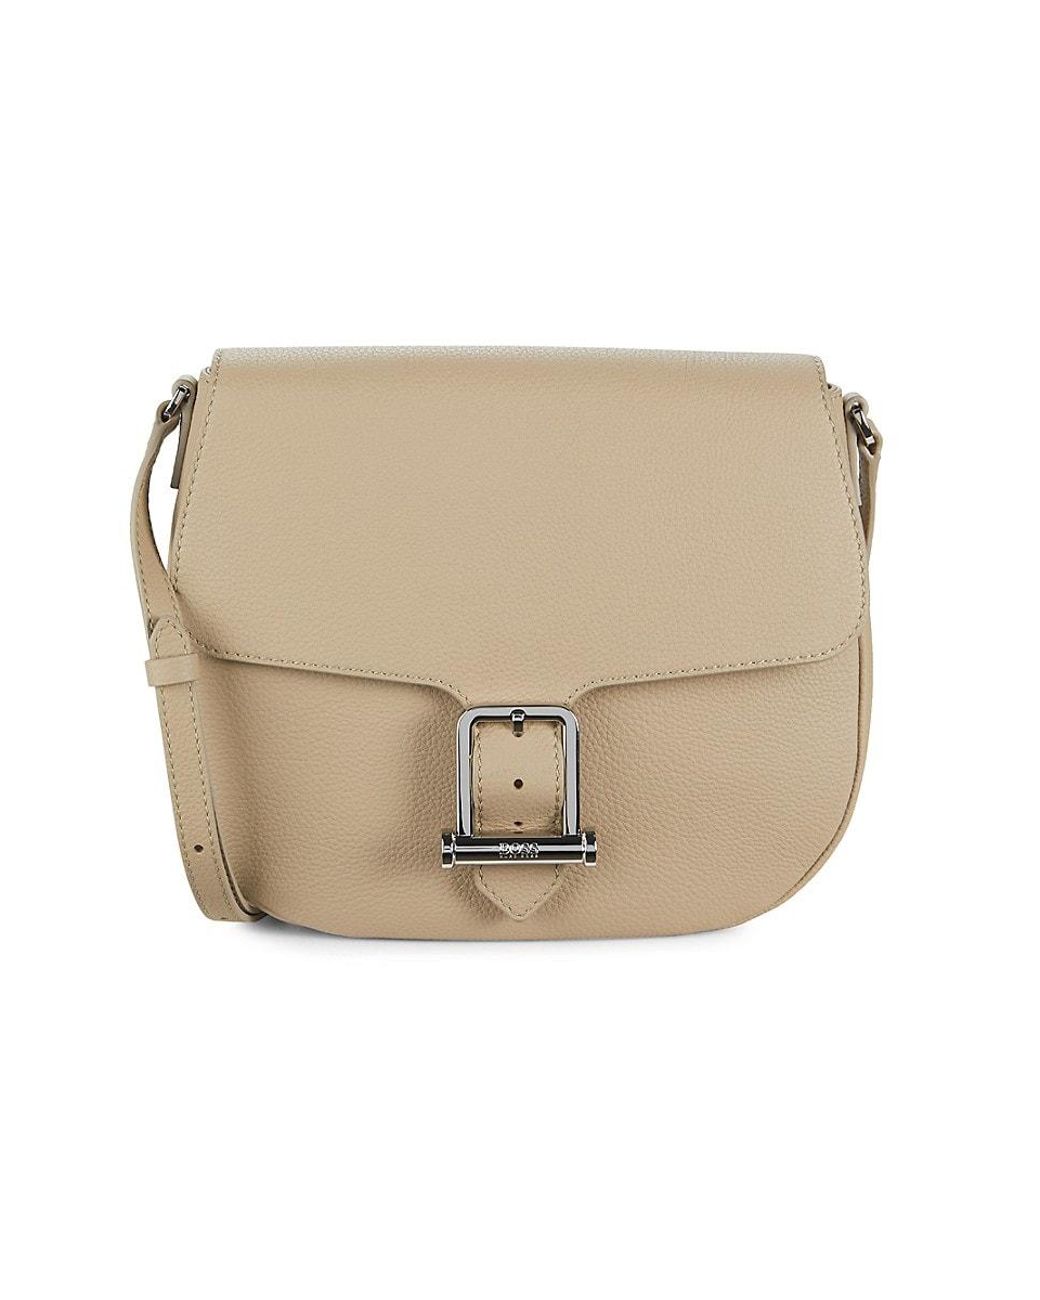 BOSS Kristin Leather Crossbody Saddle Bag in Natural | Lyst